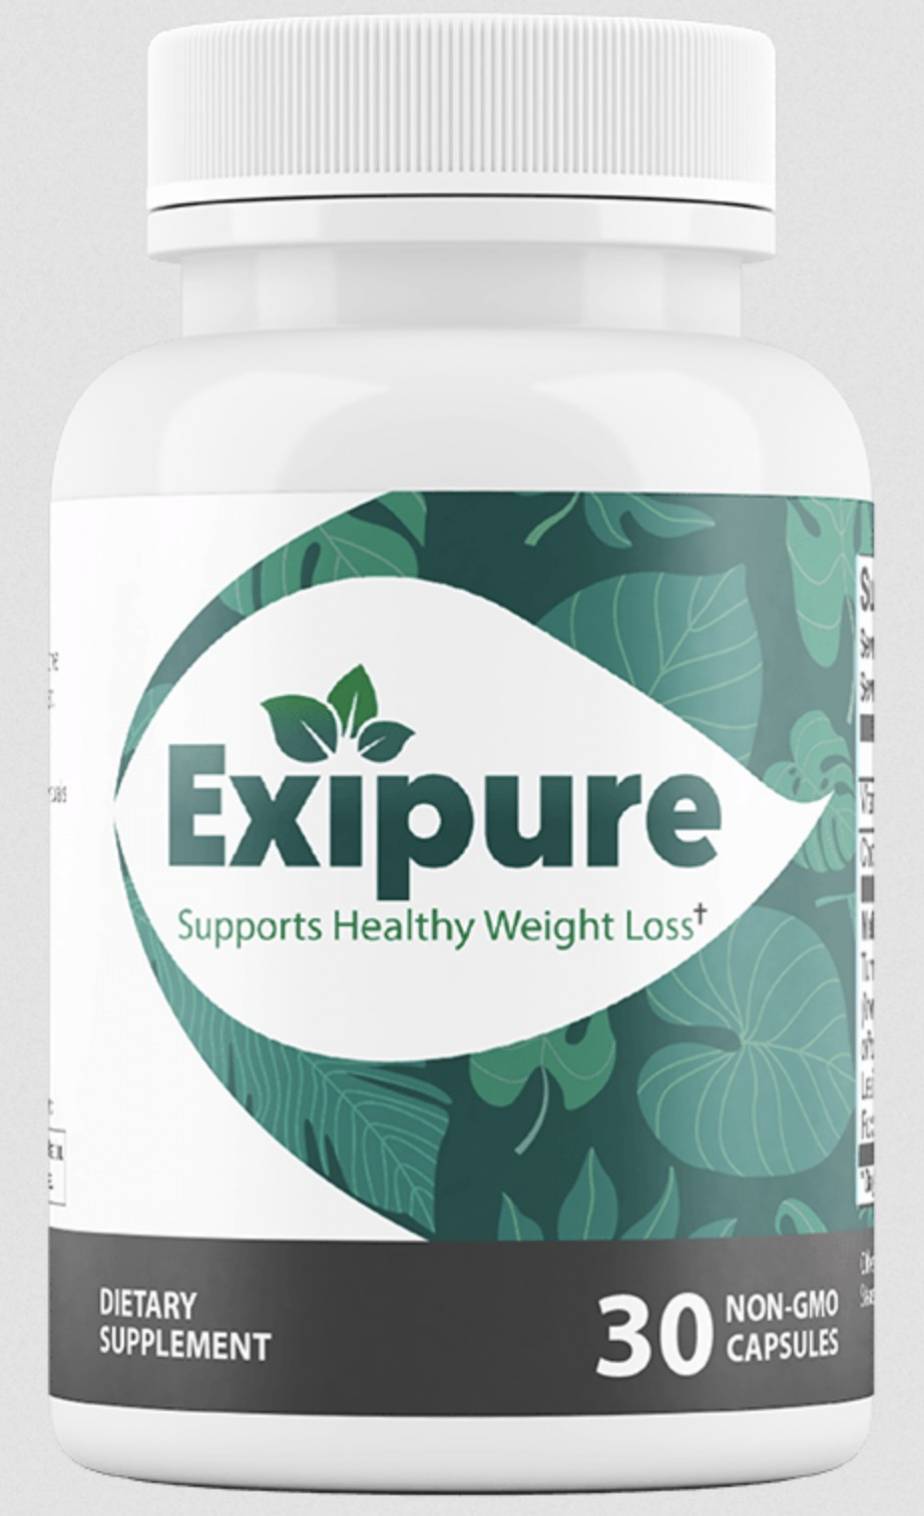 Exipure Bad Reviews And Complaints